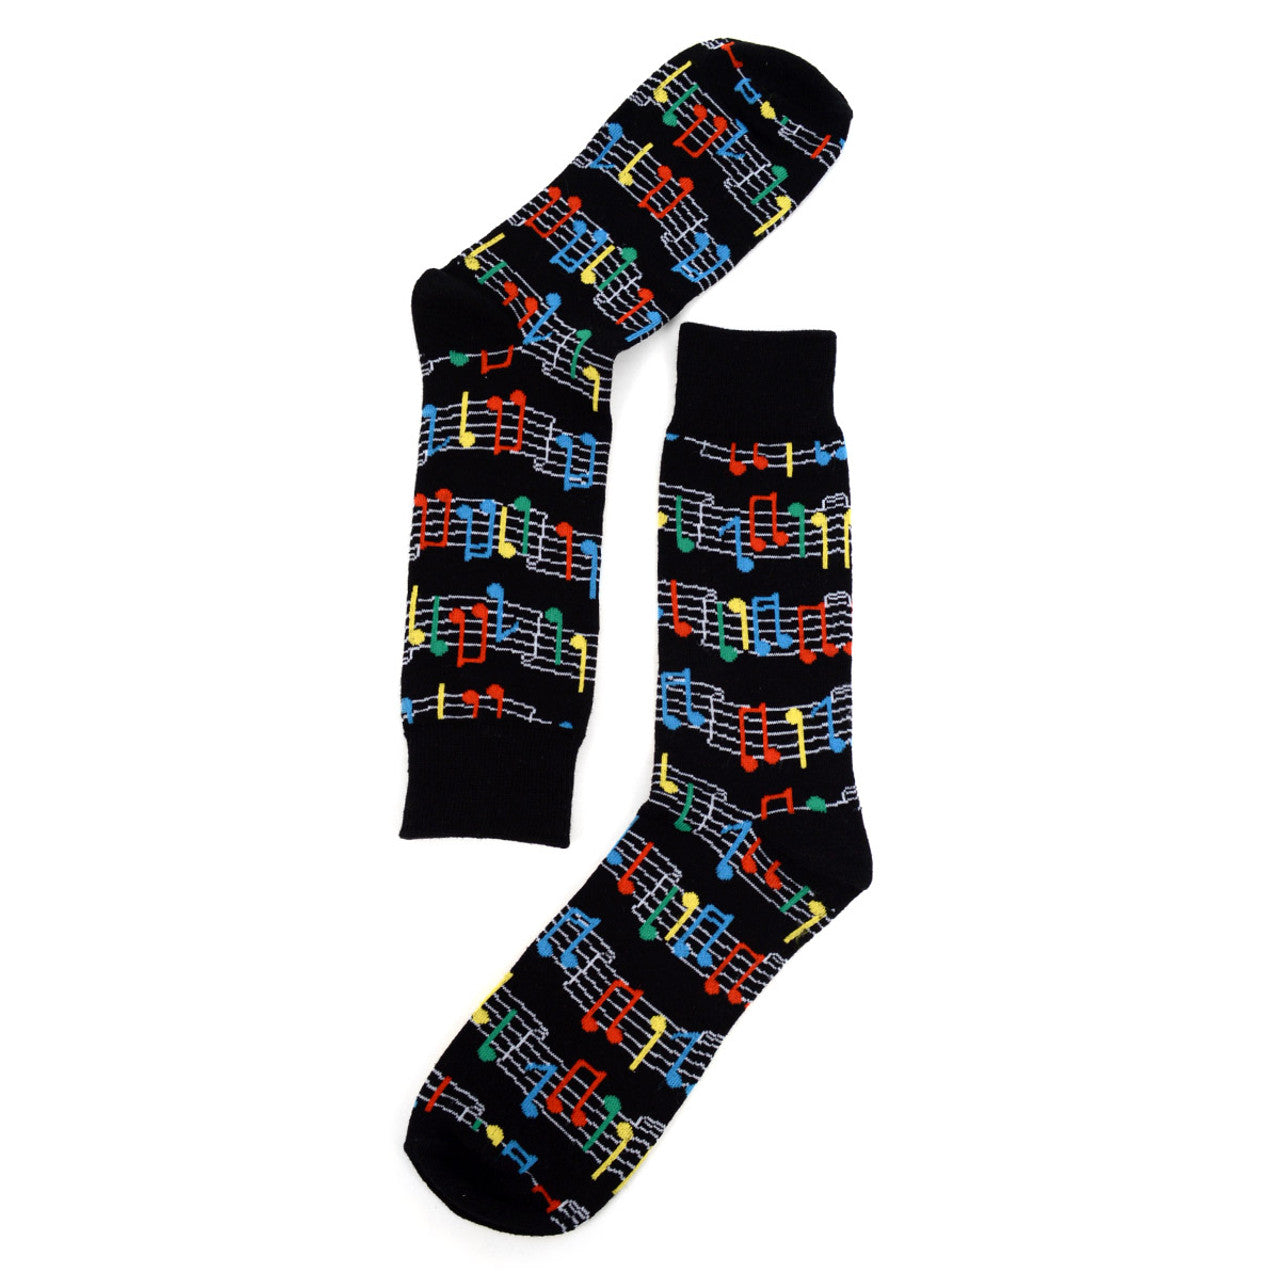 Fun Socks Men's Colorful Music Sheet Rock and Roll Music Lovers Musician Gifts Music Writter Music Notes